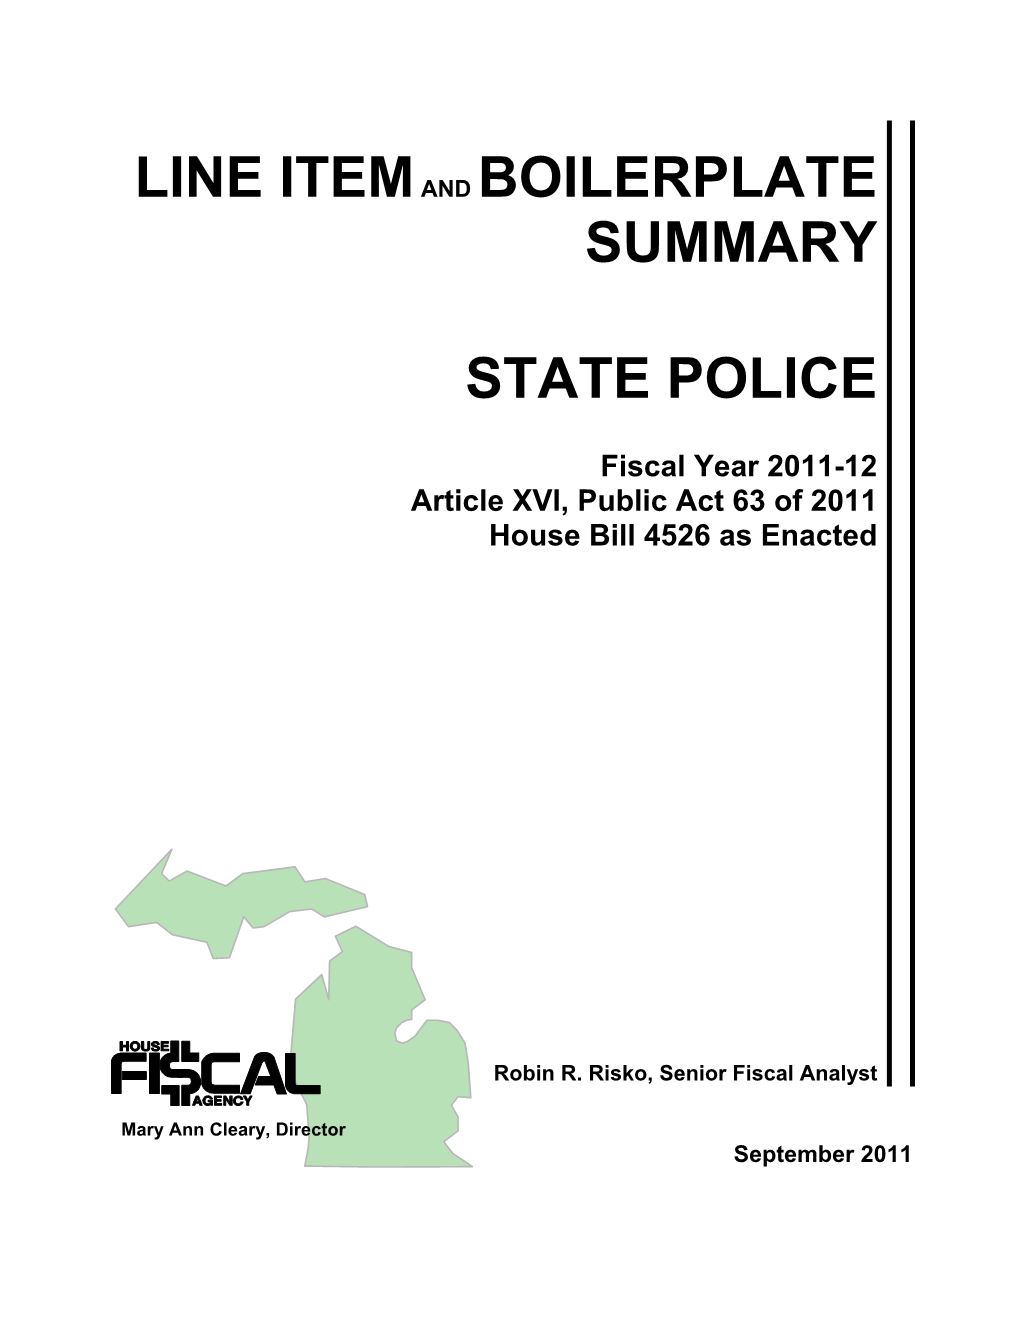 Line Item and Boilerplate Summary: State Police